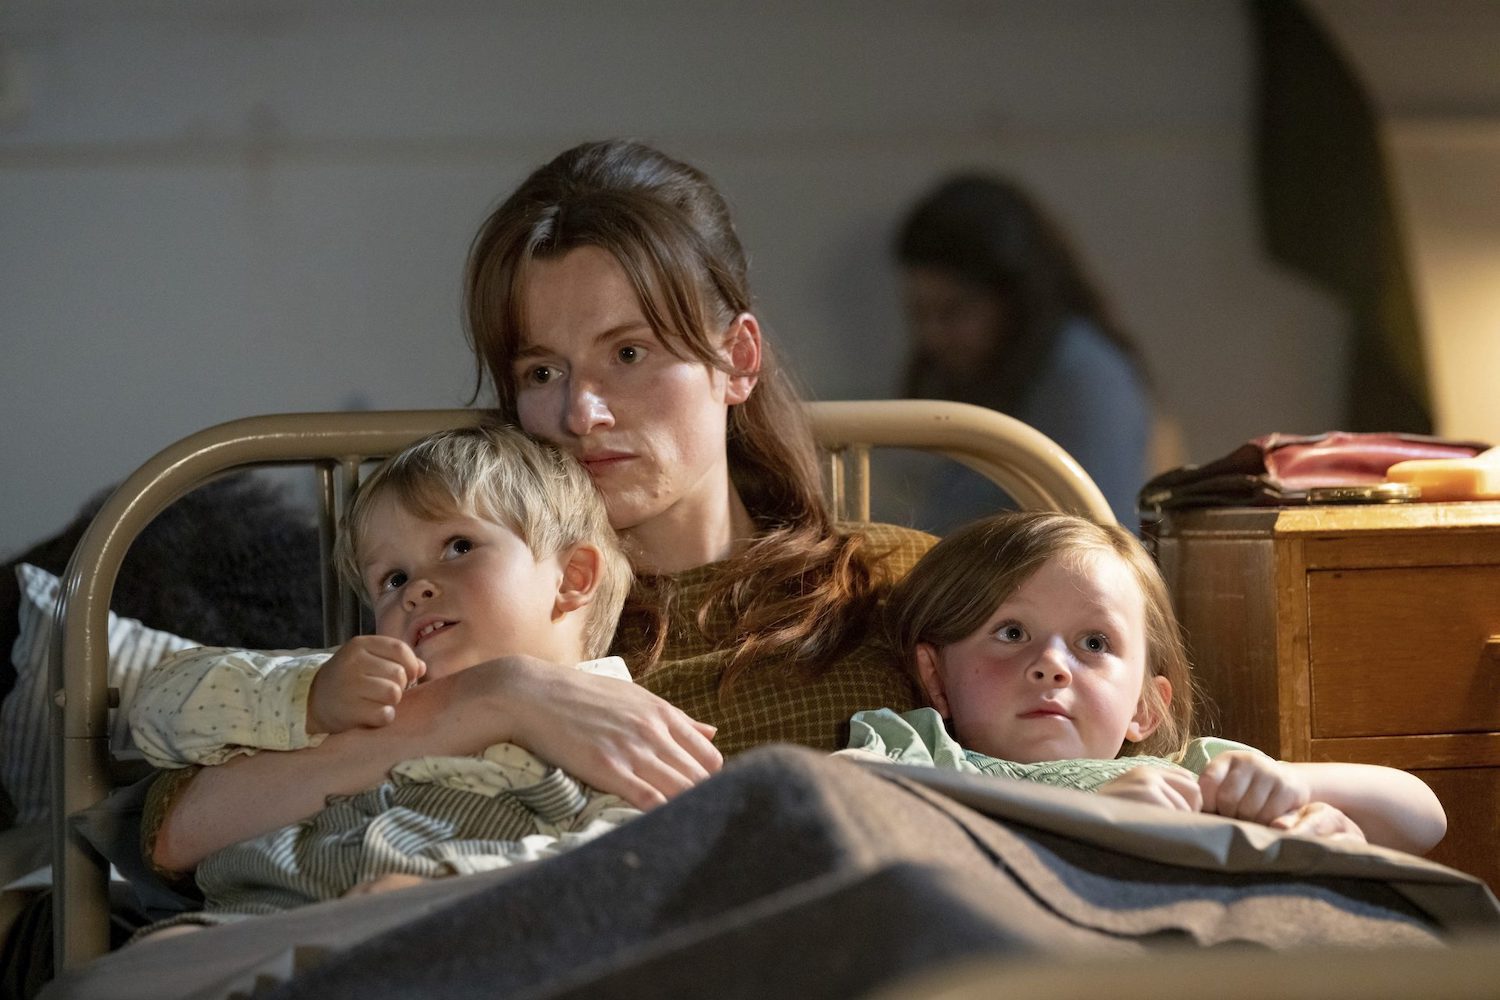 Picture shows: Sandy (Rose Riley) with her children at the shelter. They are cuddled up in an old-fashioned, narrow bed with Peter (Fred Jones) on Sandy's right and Ann Marie (Maisie Squibb) on her left.